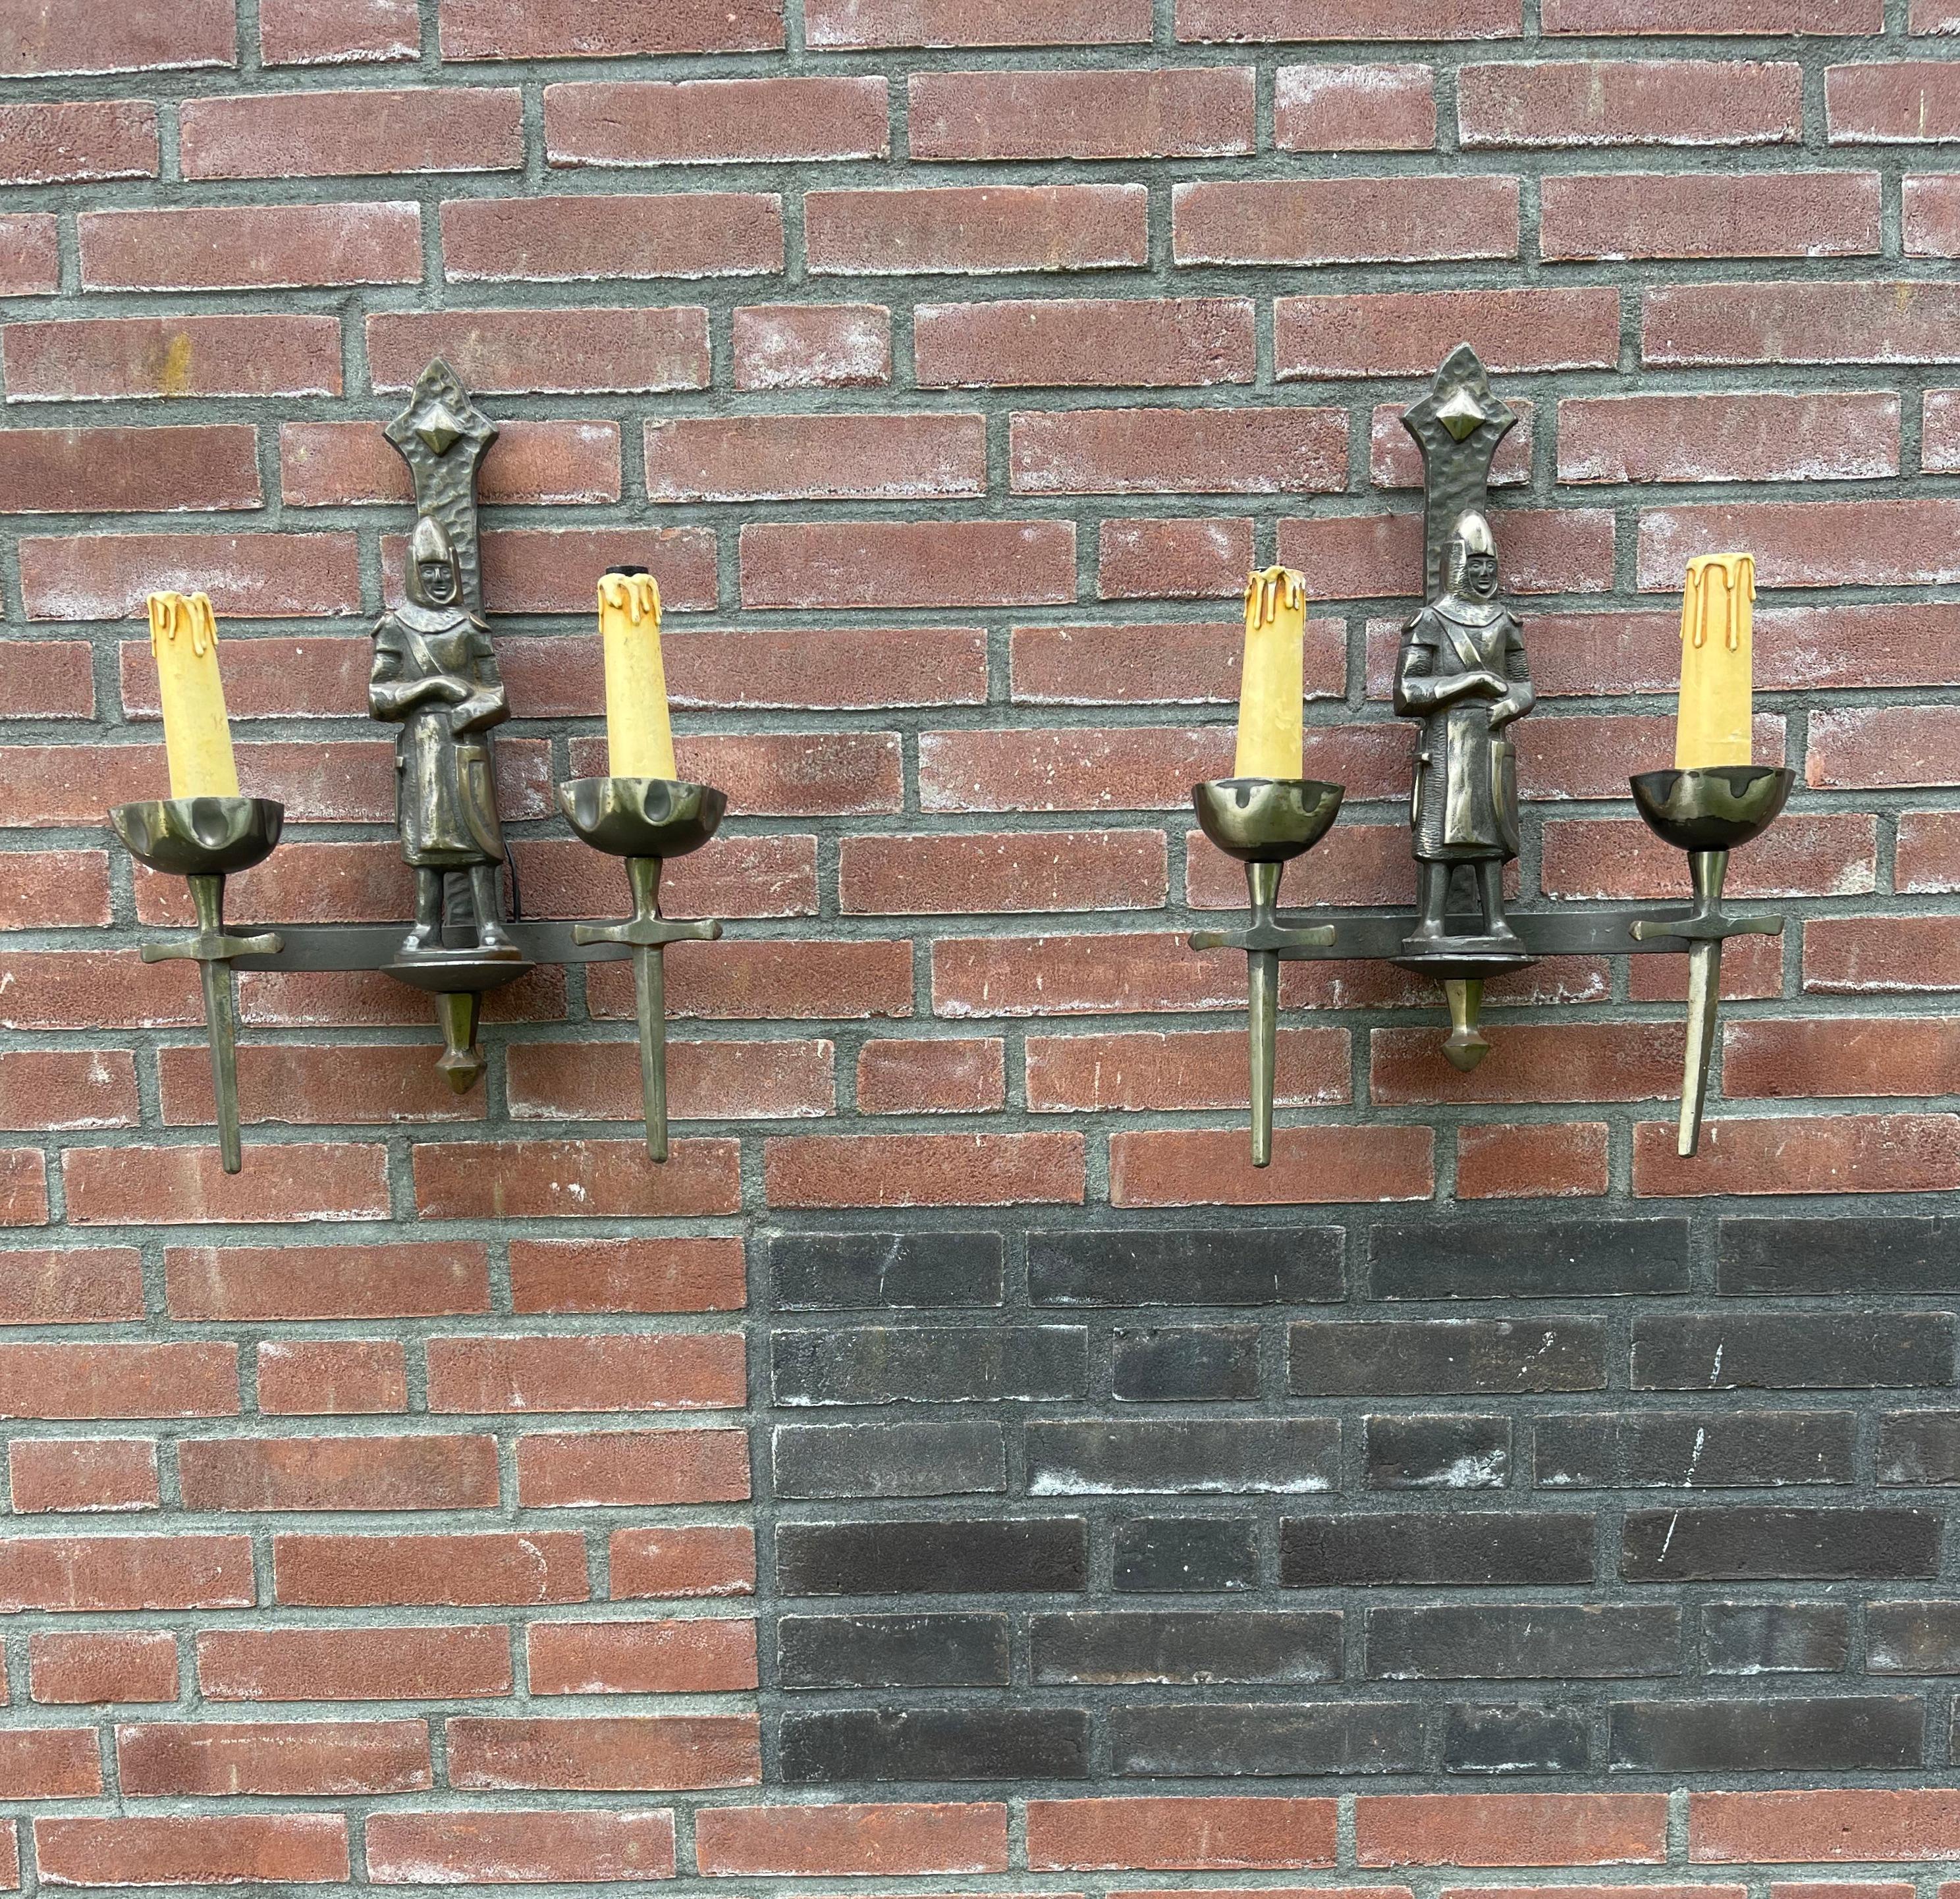 Stylish and highly decorative pair of Medieval Style sconces.

With 20th century lighting as one of our specialities, we have seen a lot of great and unique fixtures and only once before did we come across a pair of handcrafted Mediëval style